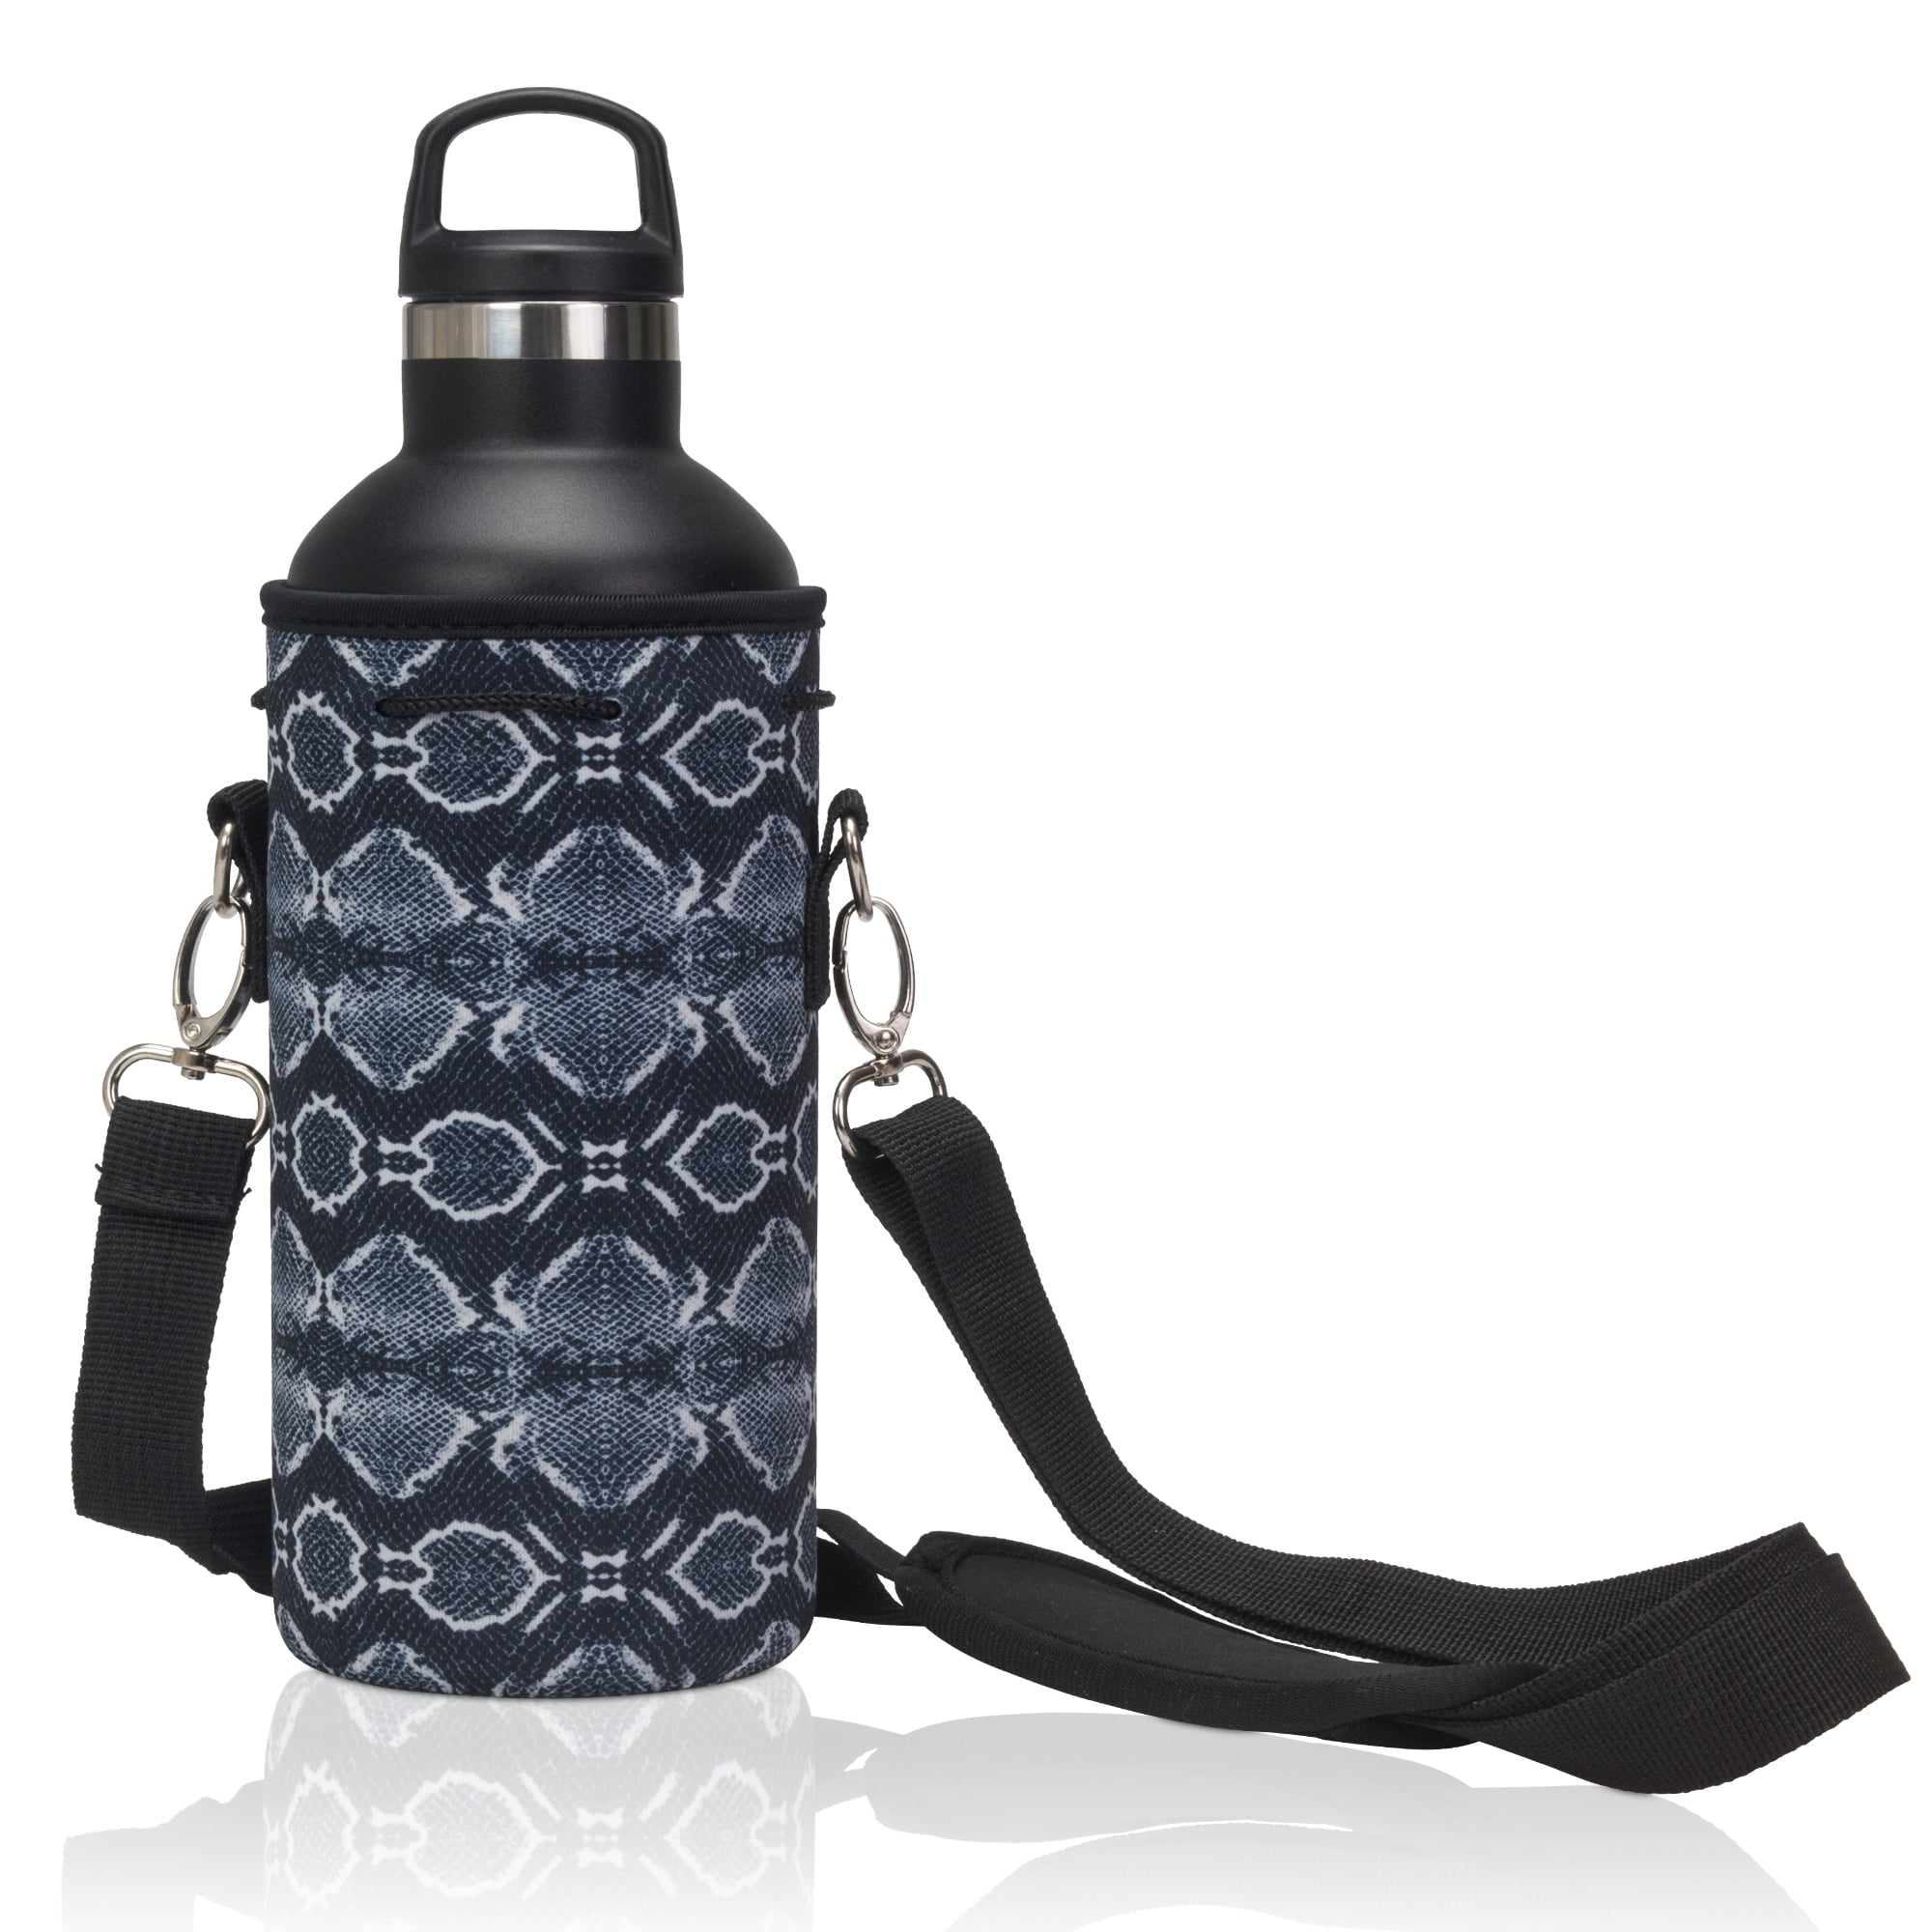 1pc Black Bottle Carrier, Braided Handle Strap, Equipped With Safety Ring  And Hook, Fit For And Other Water Bottles From 12-64 Ounces